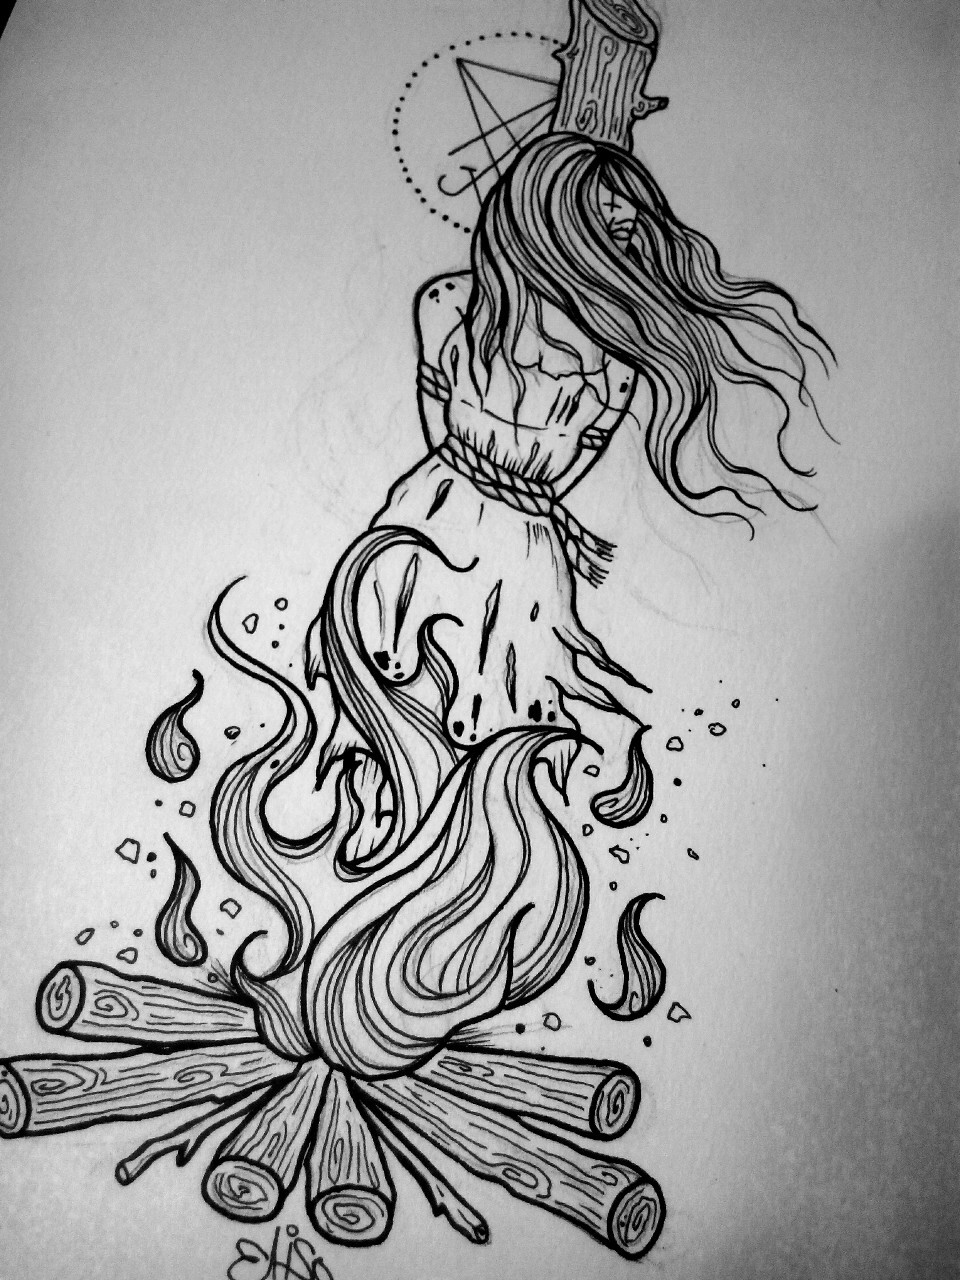 Rock N Willys Tattoo  A burning witch design that hawaiianryantattoo did  this week Stop in and set up your next appointment rocknwillystattoo  rocknwillys tattoo stroudsburg esu ncc eaststroudsburguniversity  bartonsville tattoos 